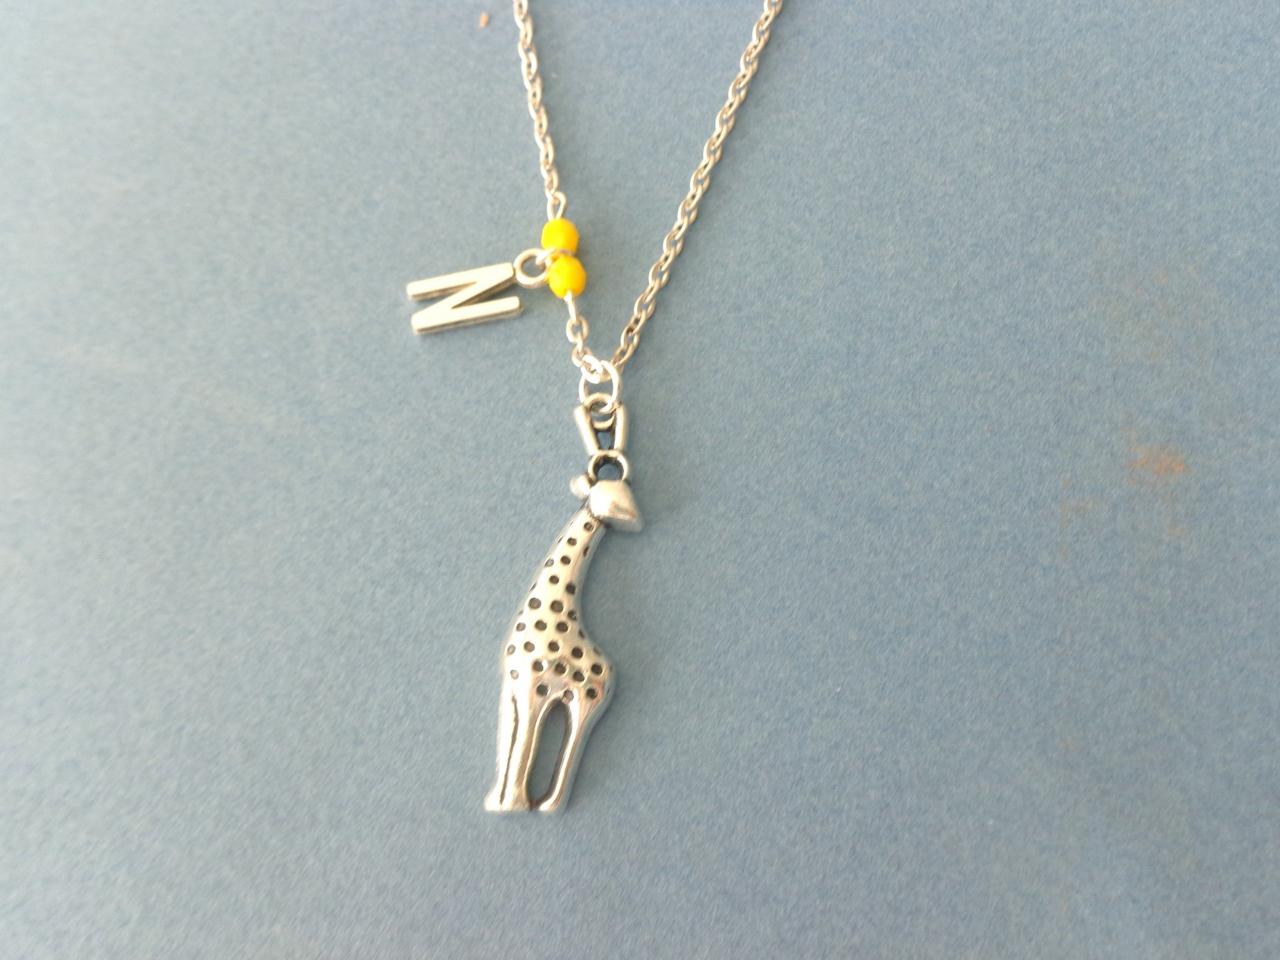 Silver Giraffe Pendant Necklace, Personalized, Initial Yellow